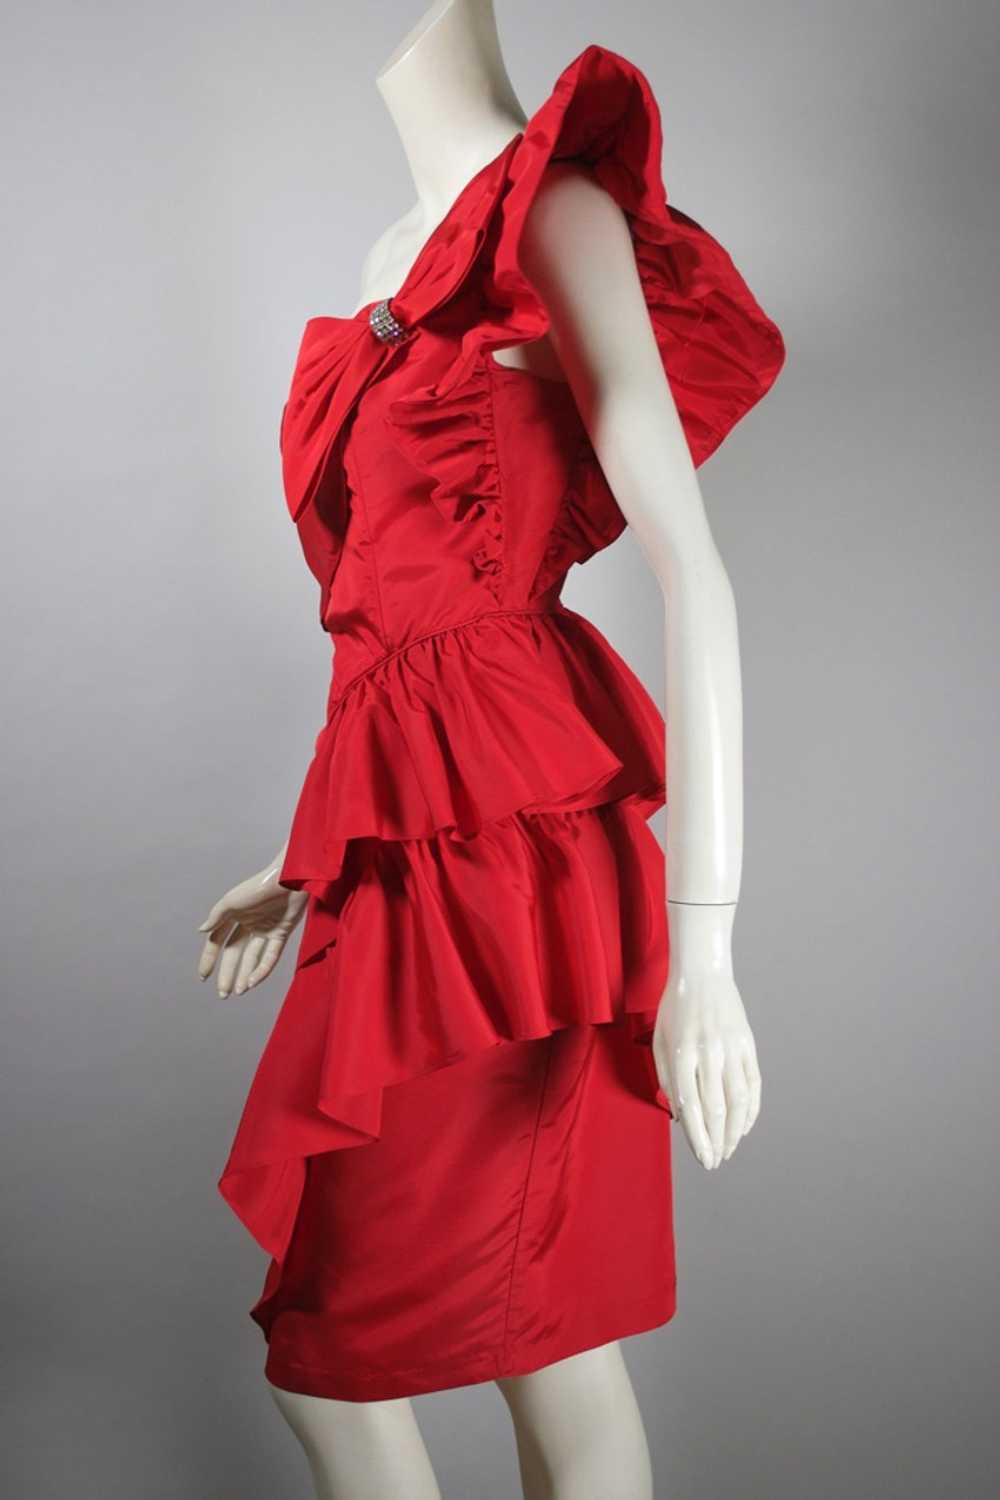 1-shoulder ruffled red 80s party dress with bow XS - image 6